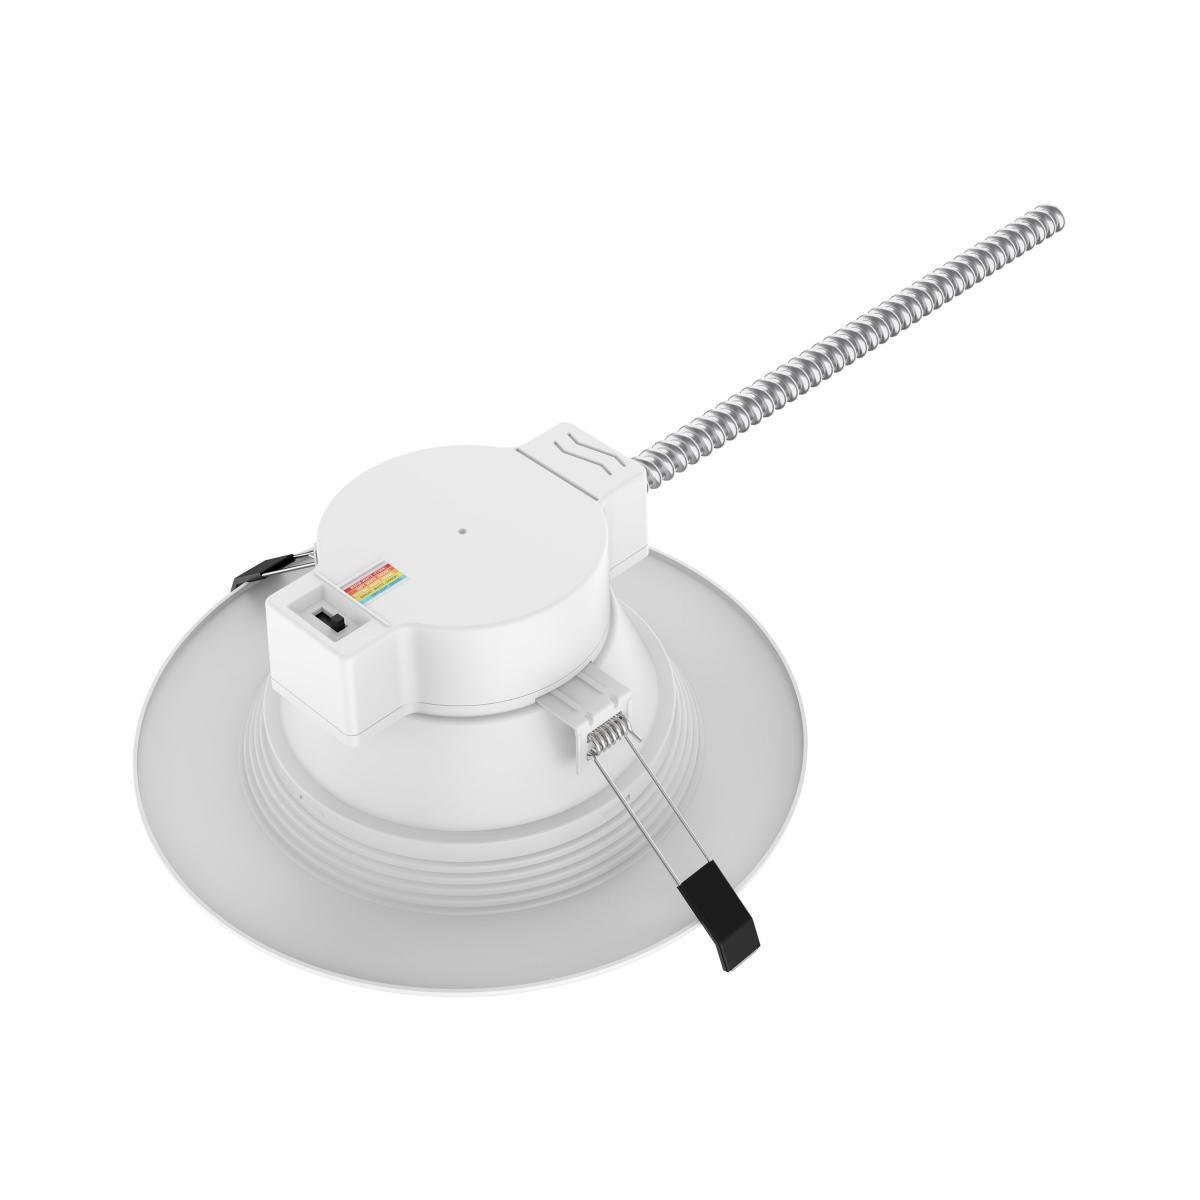 8 Inch Commercial LED Downlight, Round, 22 Watt, 2200 Lumens, Selectable CCT, 2700K to 5000K, Baffle Trim - Bees Lighting